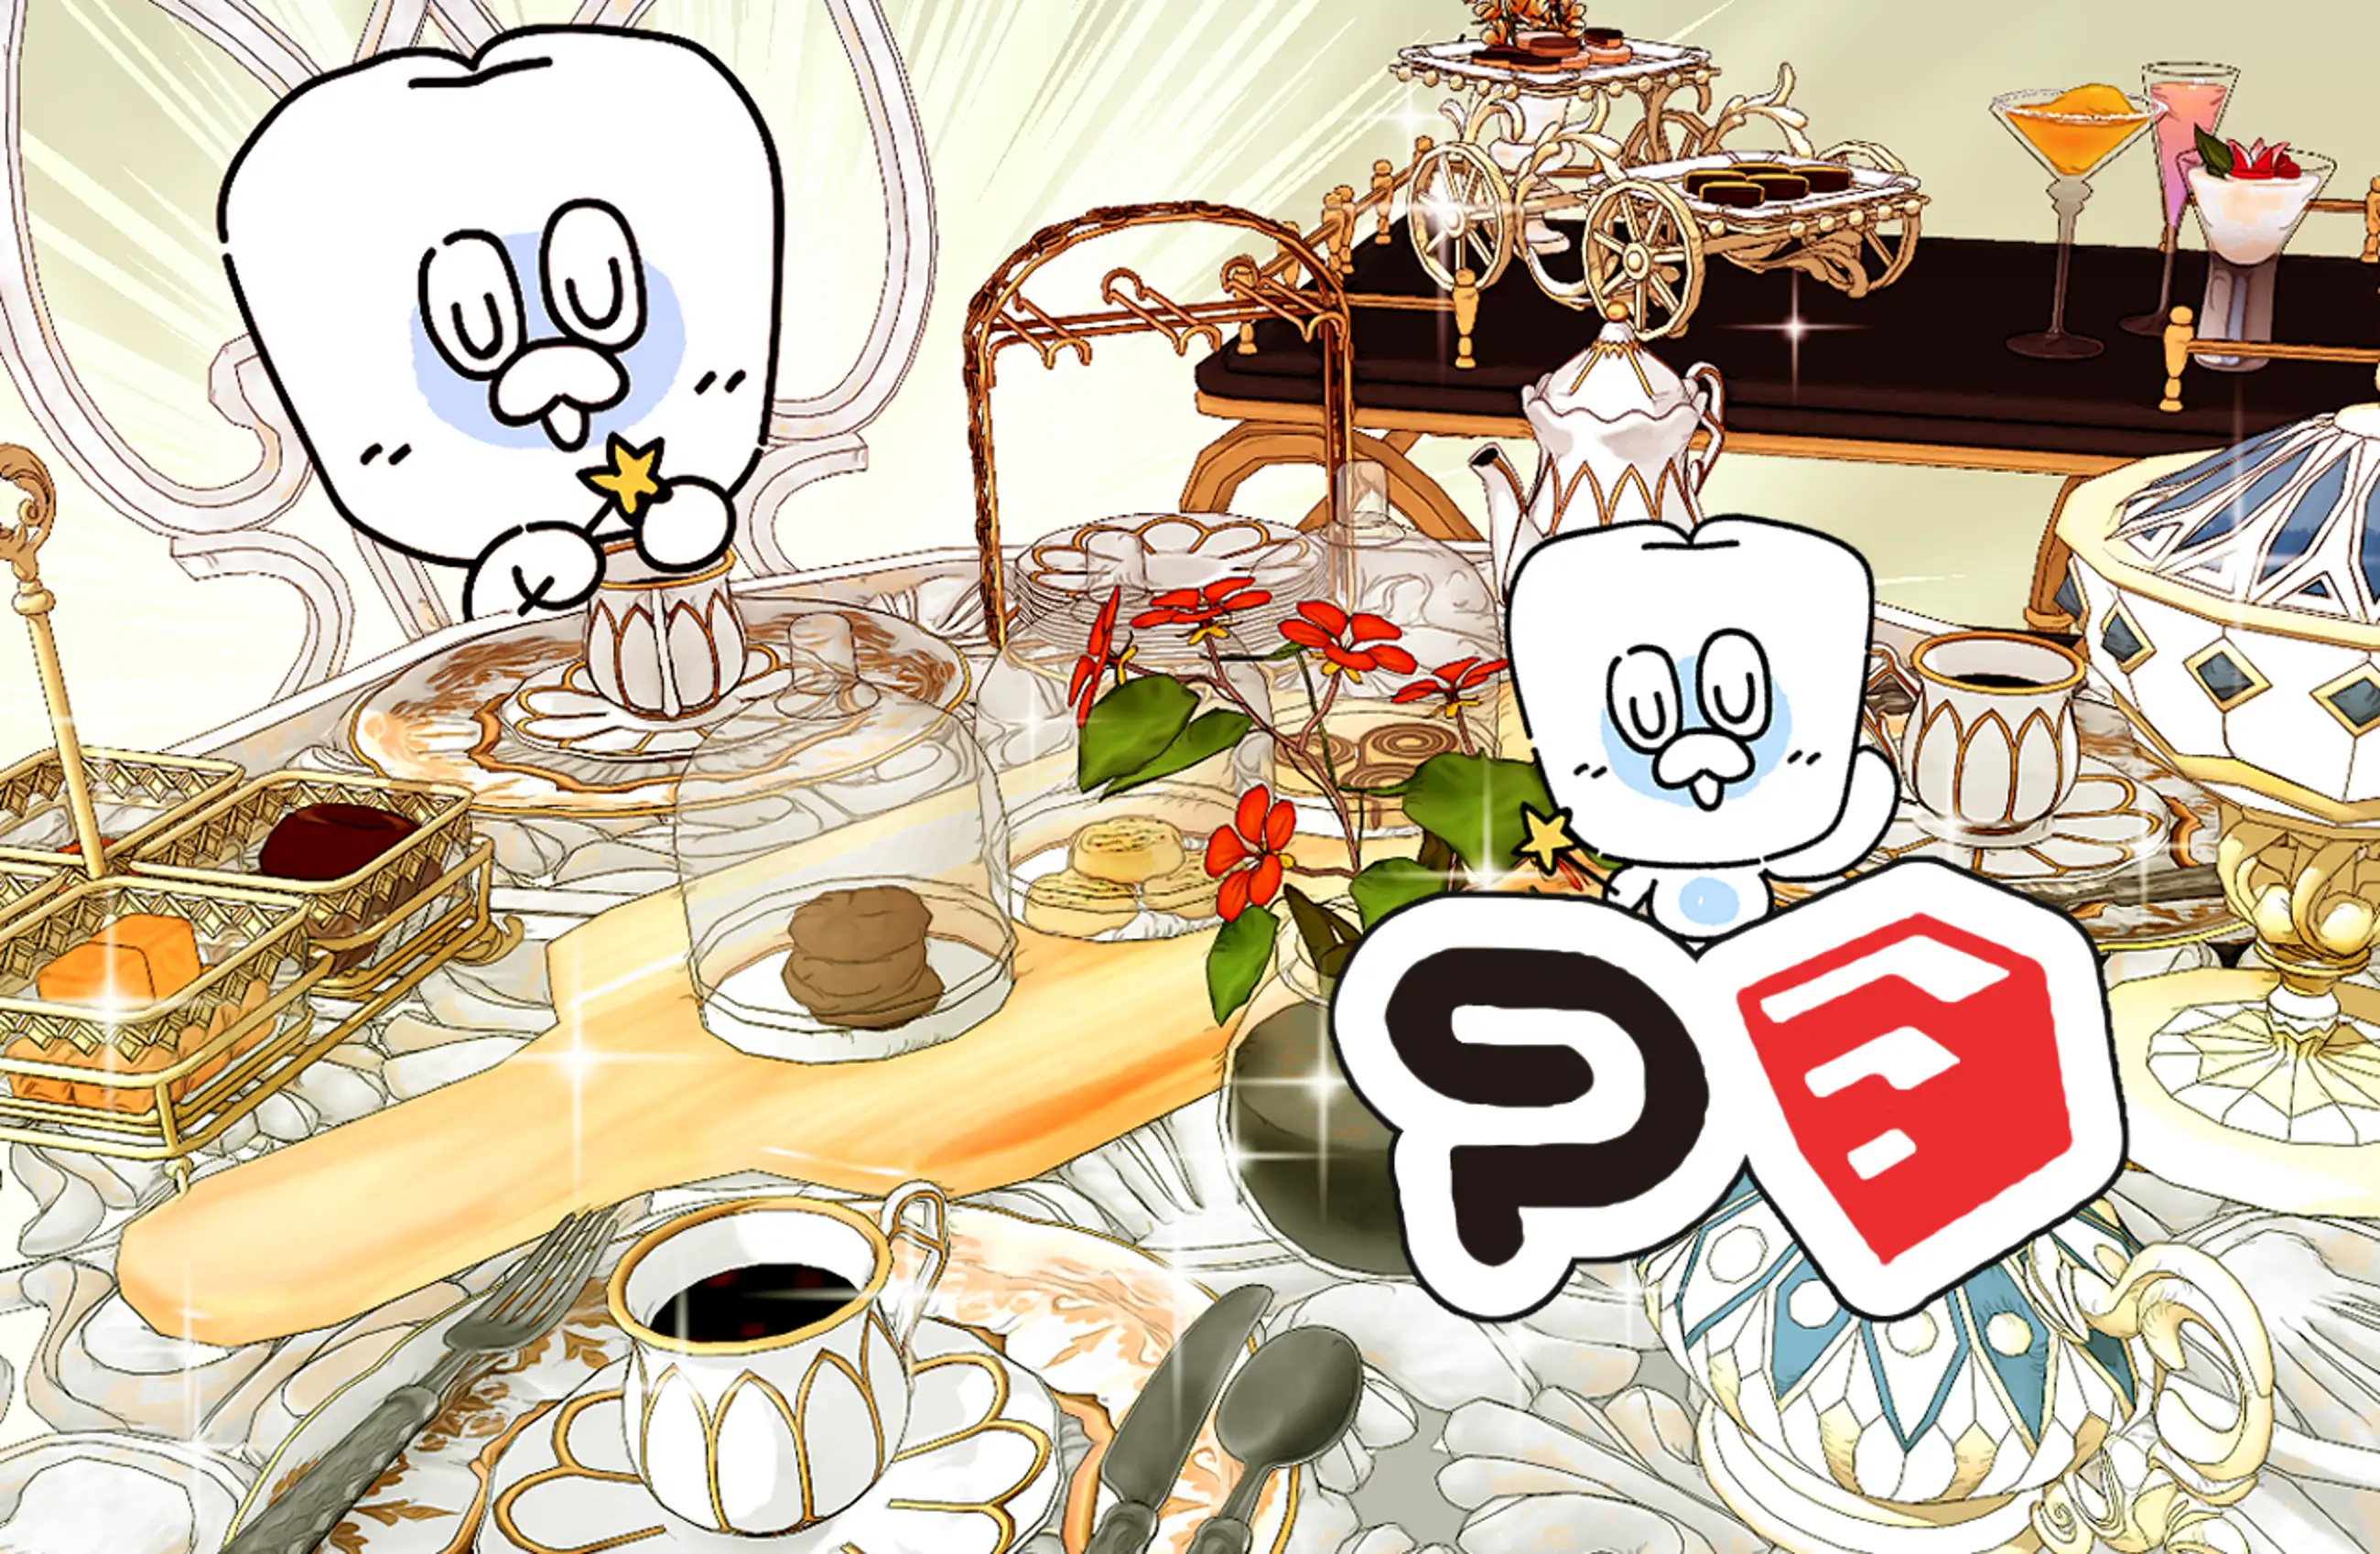 [Tea party with 1,600 items] Tea party with food items